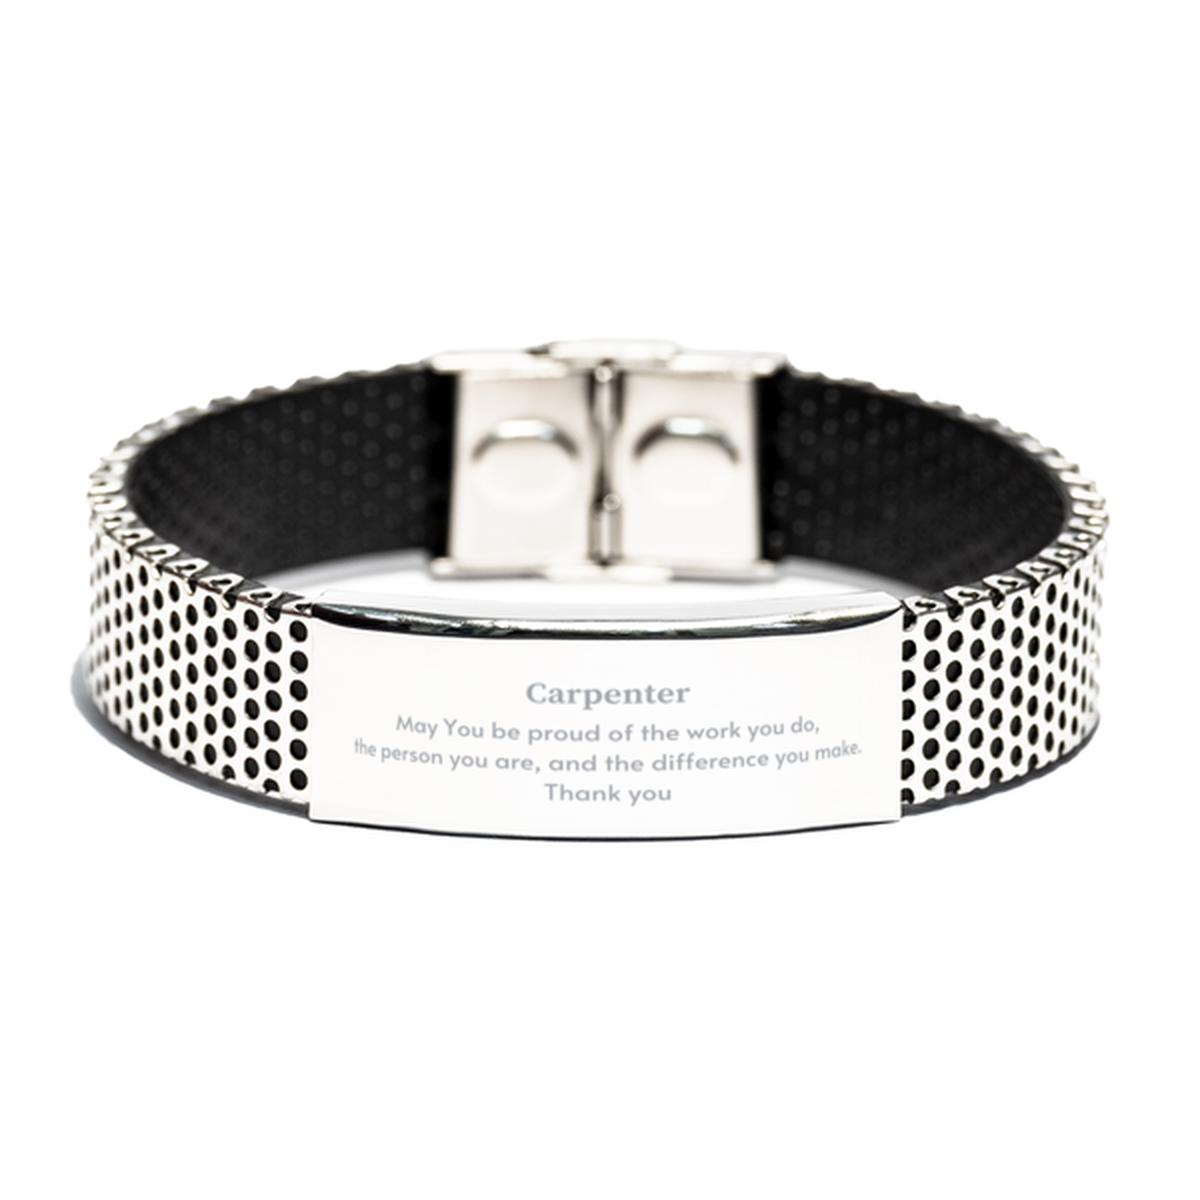 Heartwarming Stainless Steel Bracelet Retirement Coworkers Gifts for Carpenter, Carpenter May You be proud of the work you do, the person you are Gifts for Boss Men Women Friends